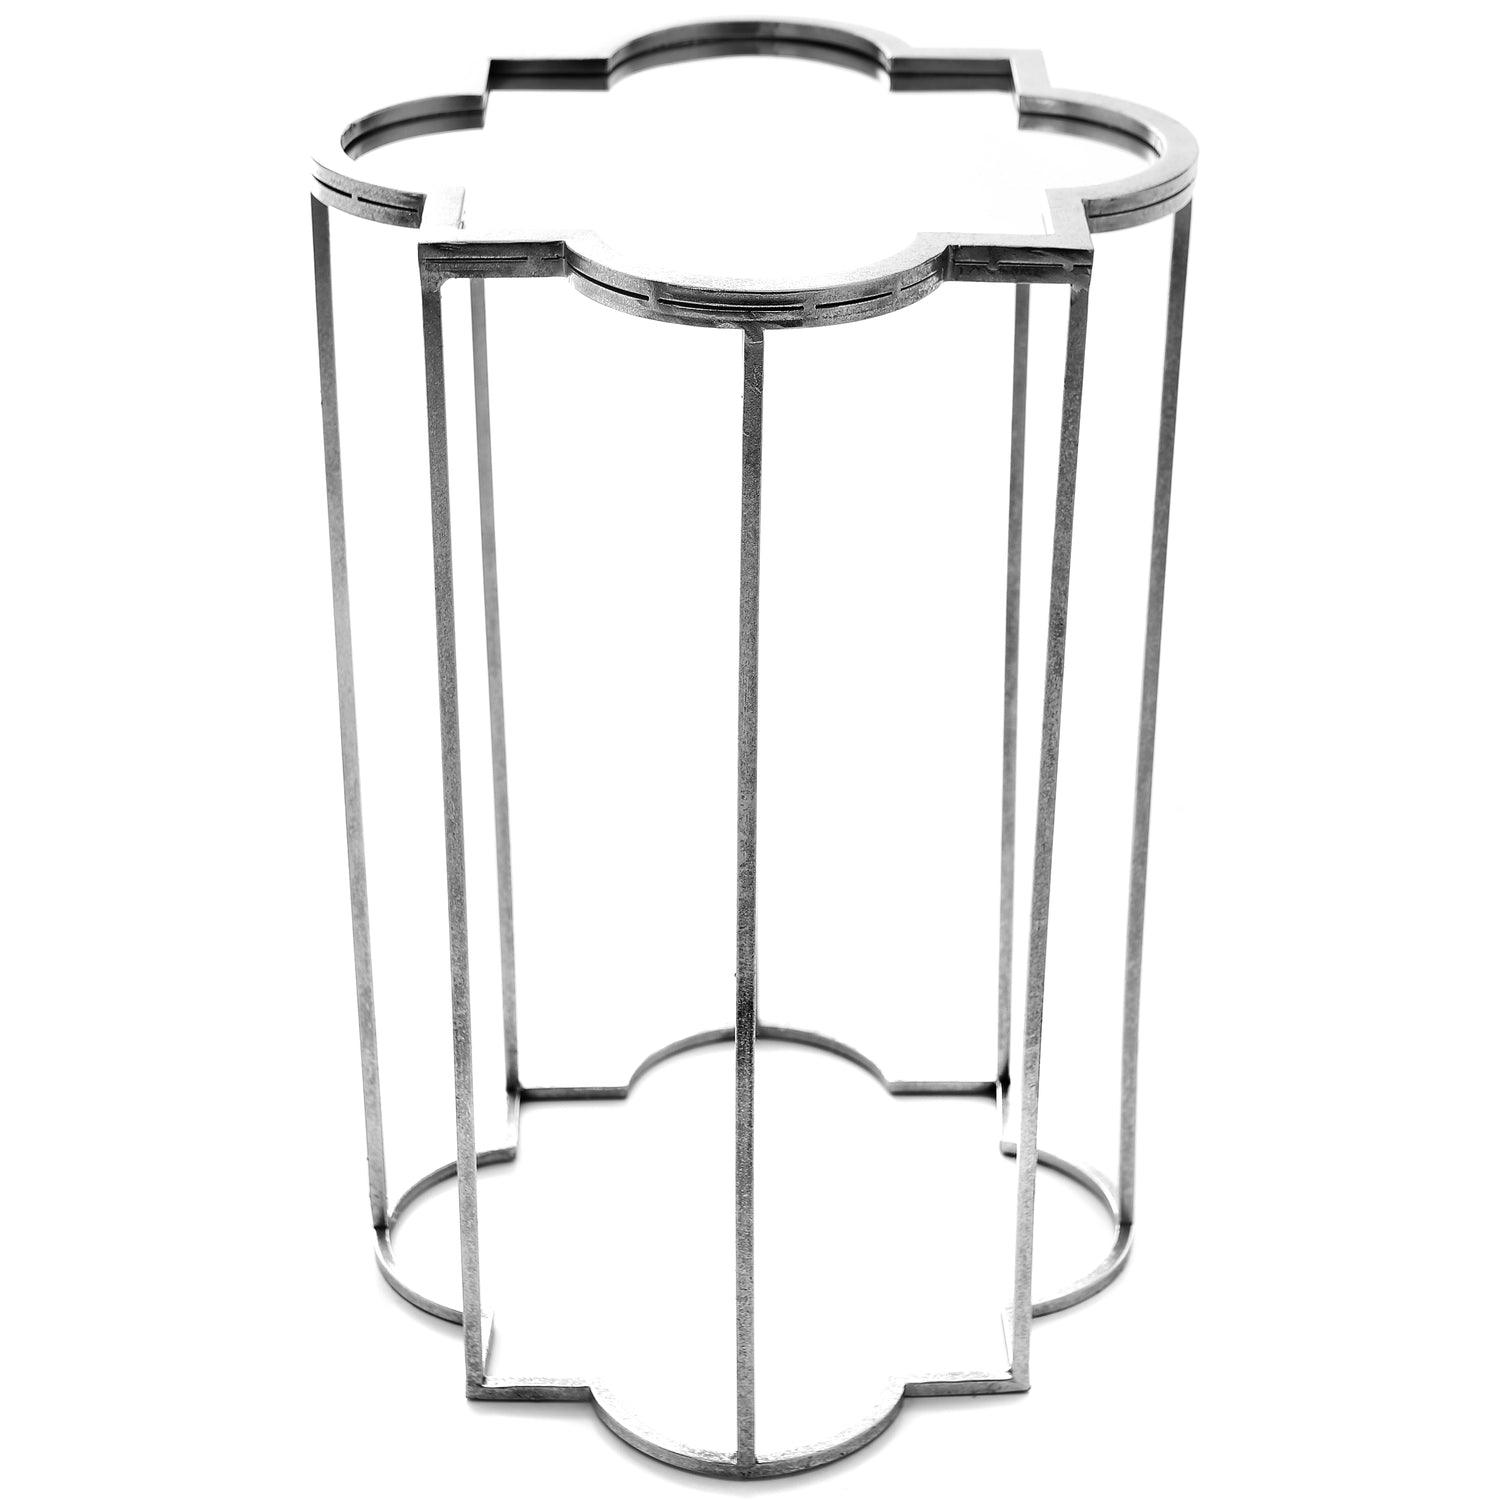 Quarter Foil Mirrored Set Of Two Side Tables - Vookoo Lifestyle